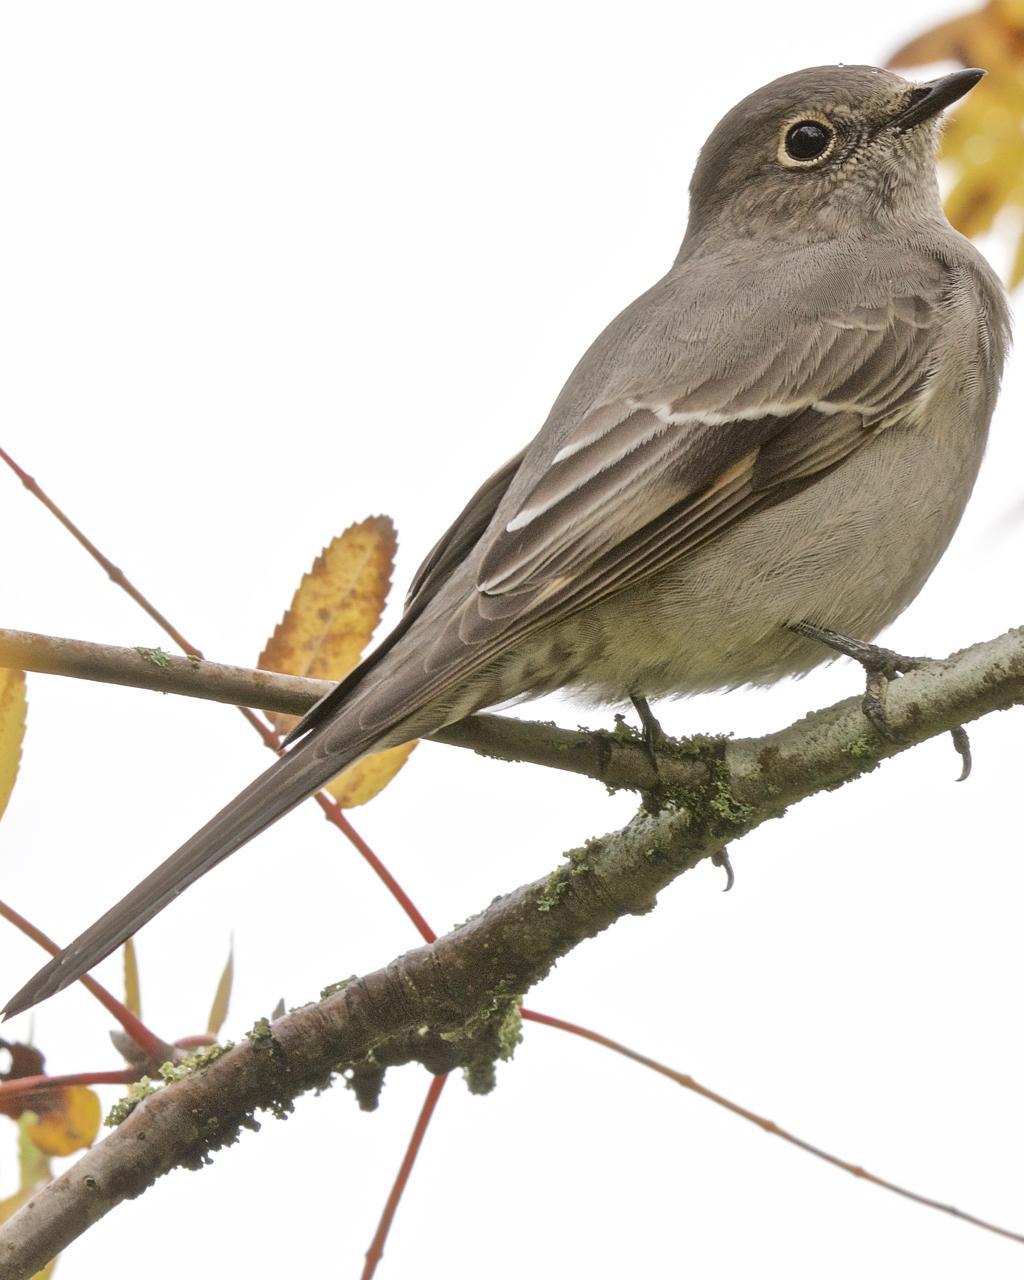 Townsend's Solitaire Photo by Brian Avent